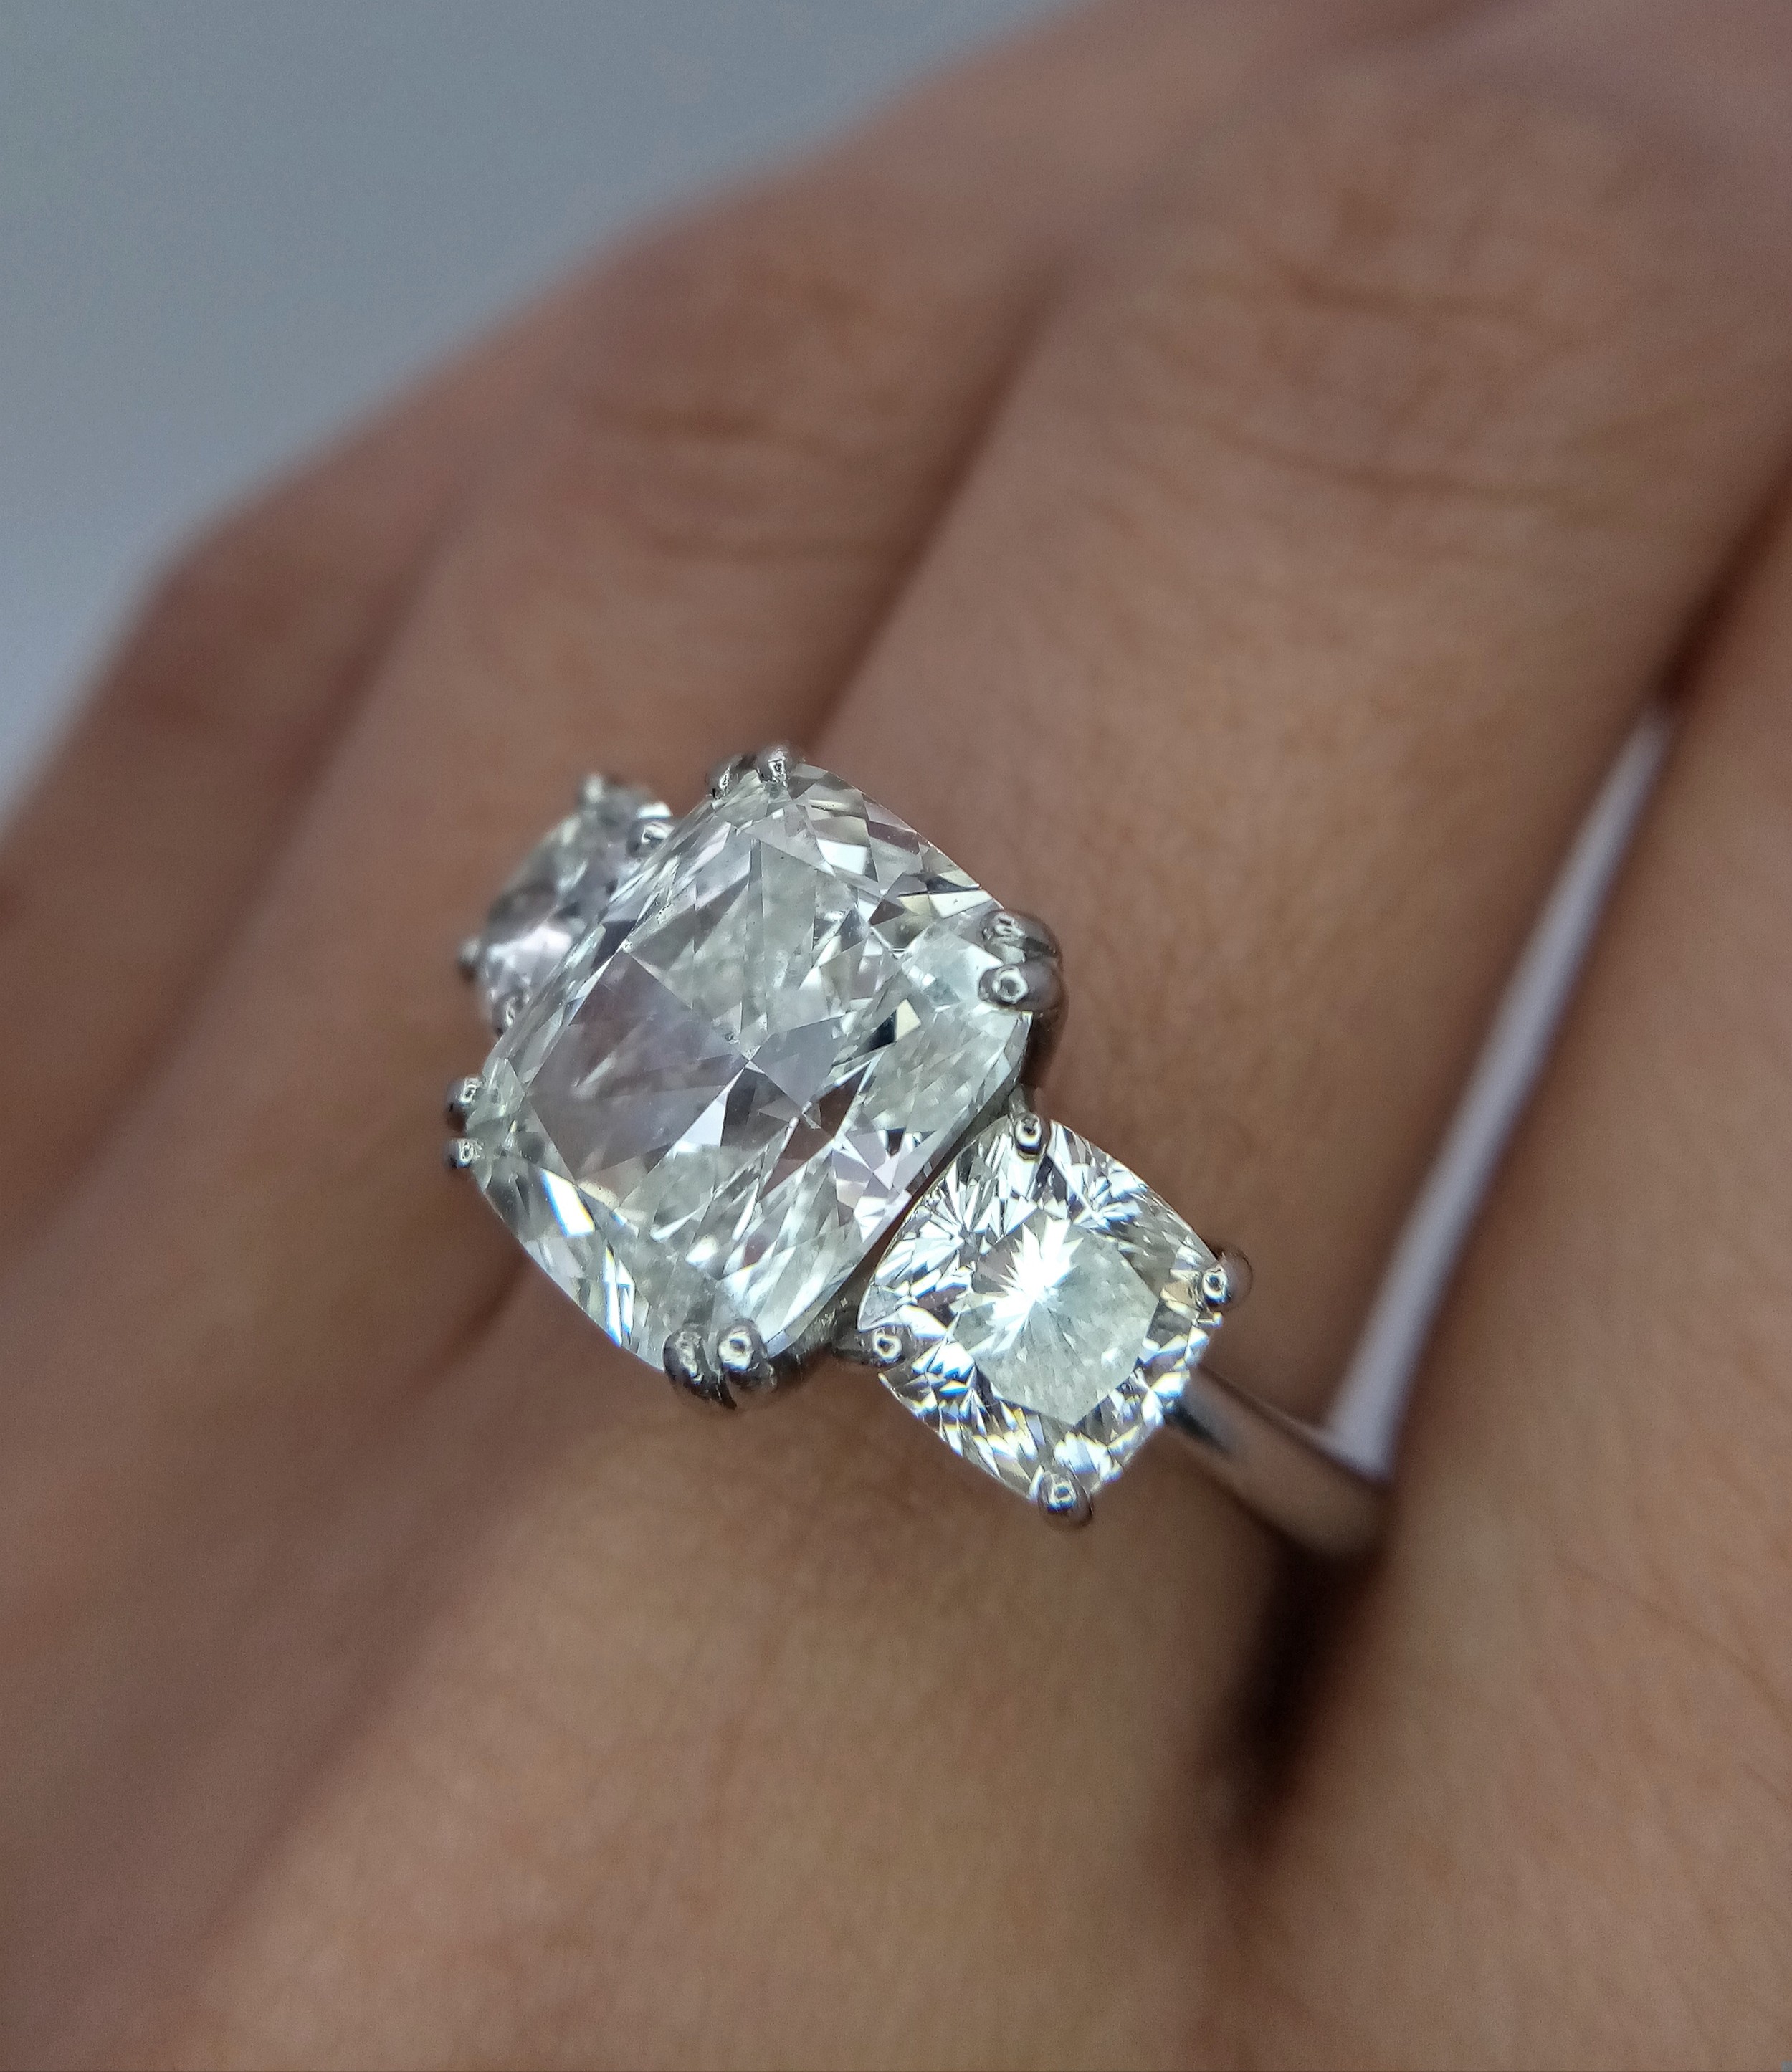 A Breathtaking 4.01ct GIA Certified Diamond Ring. A brilliant cushion cut 4.01ct central diamond - Image 19 of 22